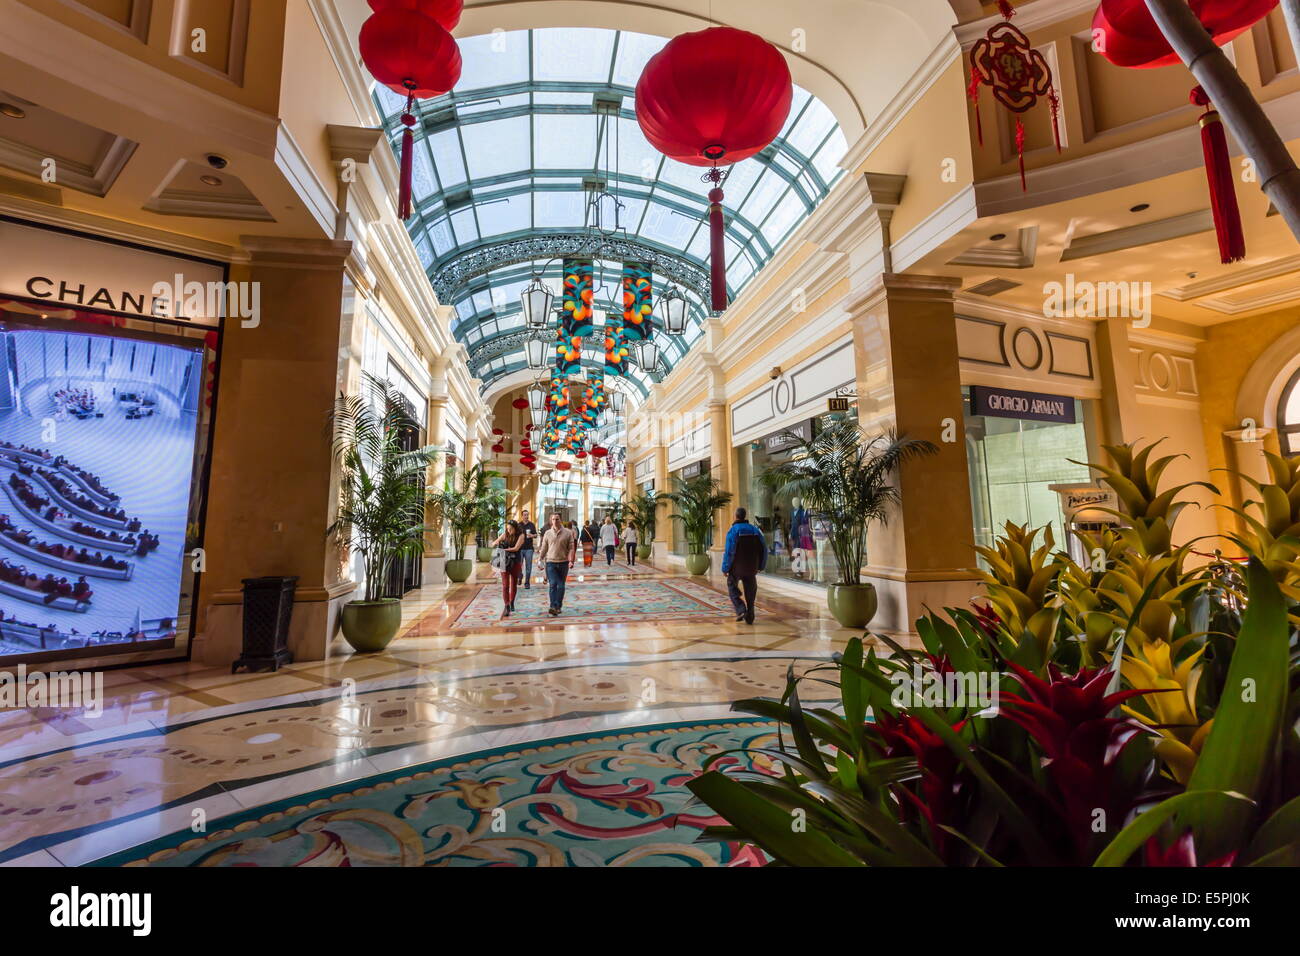 Shoppers strolling in the Via Bellagio with Chinese New Year decorations, Bellagio Hotel, Las Vegas, Nevada, USA Stock Photo